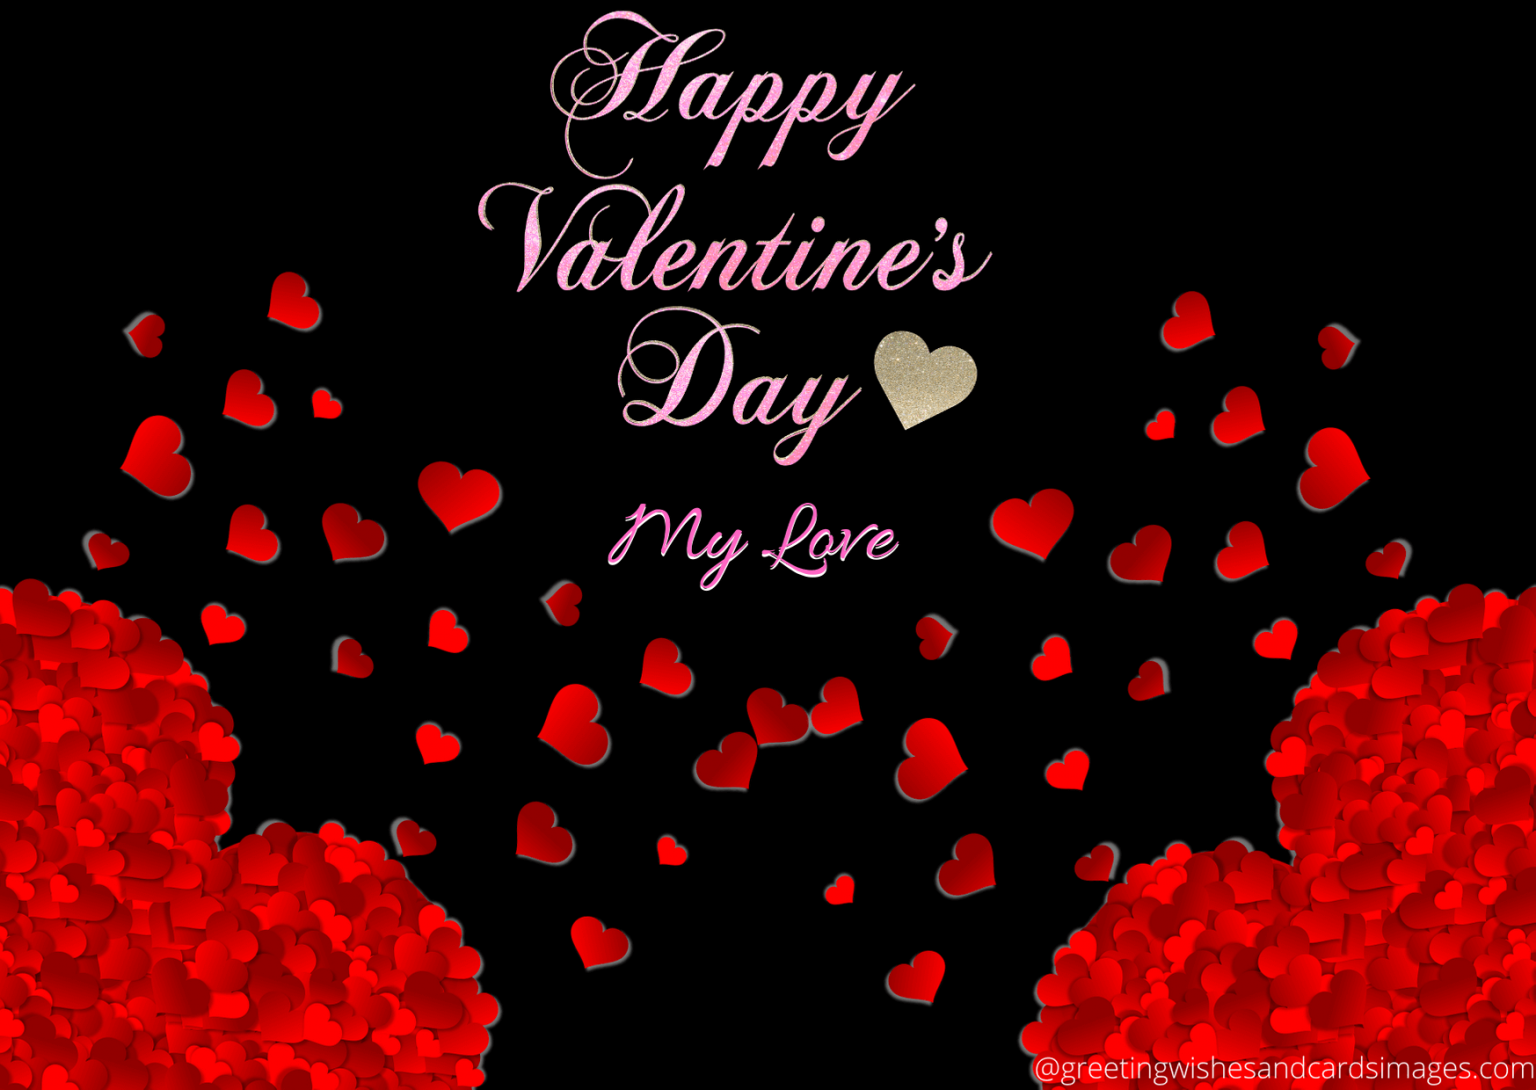 Most Romantic Songs For Valentine'S Day Special 2023 - Greeting Wishes And Cards Images